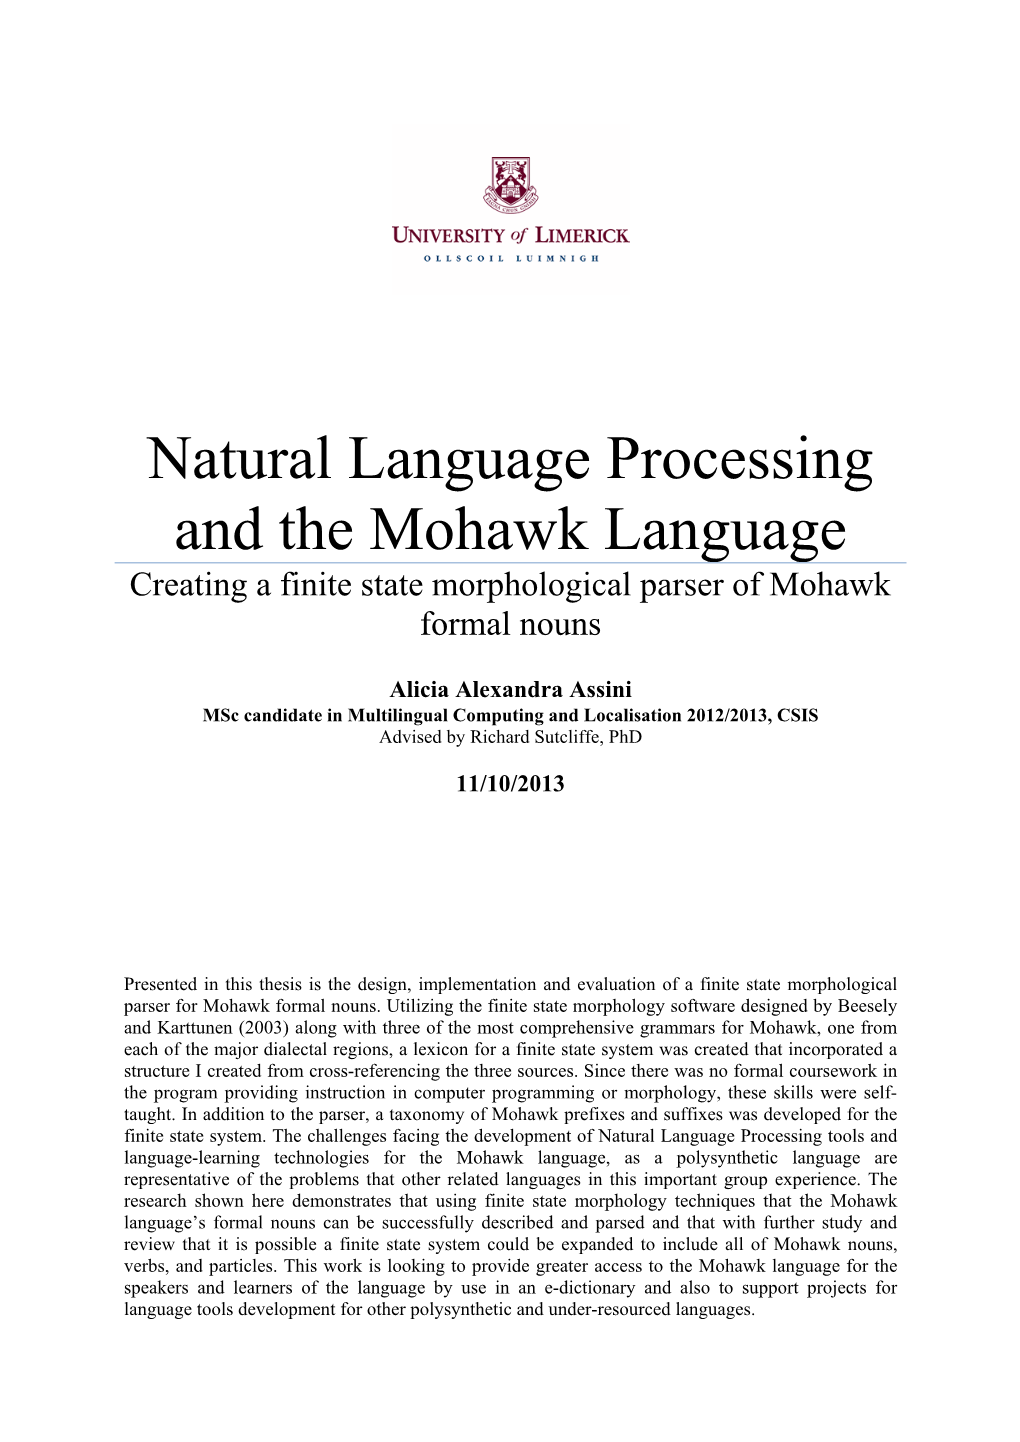 Natural Language Processing and the Mohawk Language Creating a Finite State Morphological Parser of Mohawk Formal Nouns